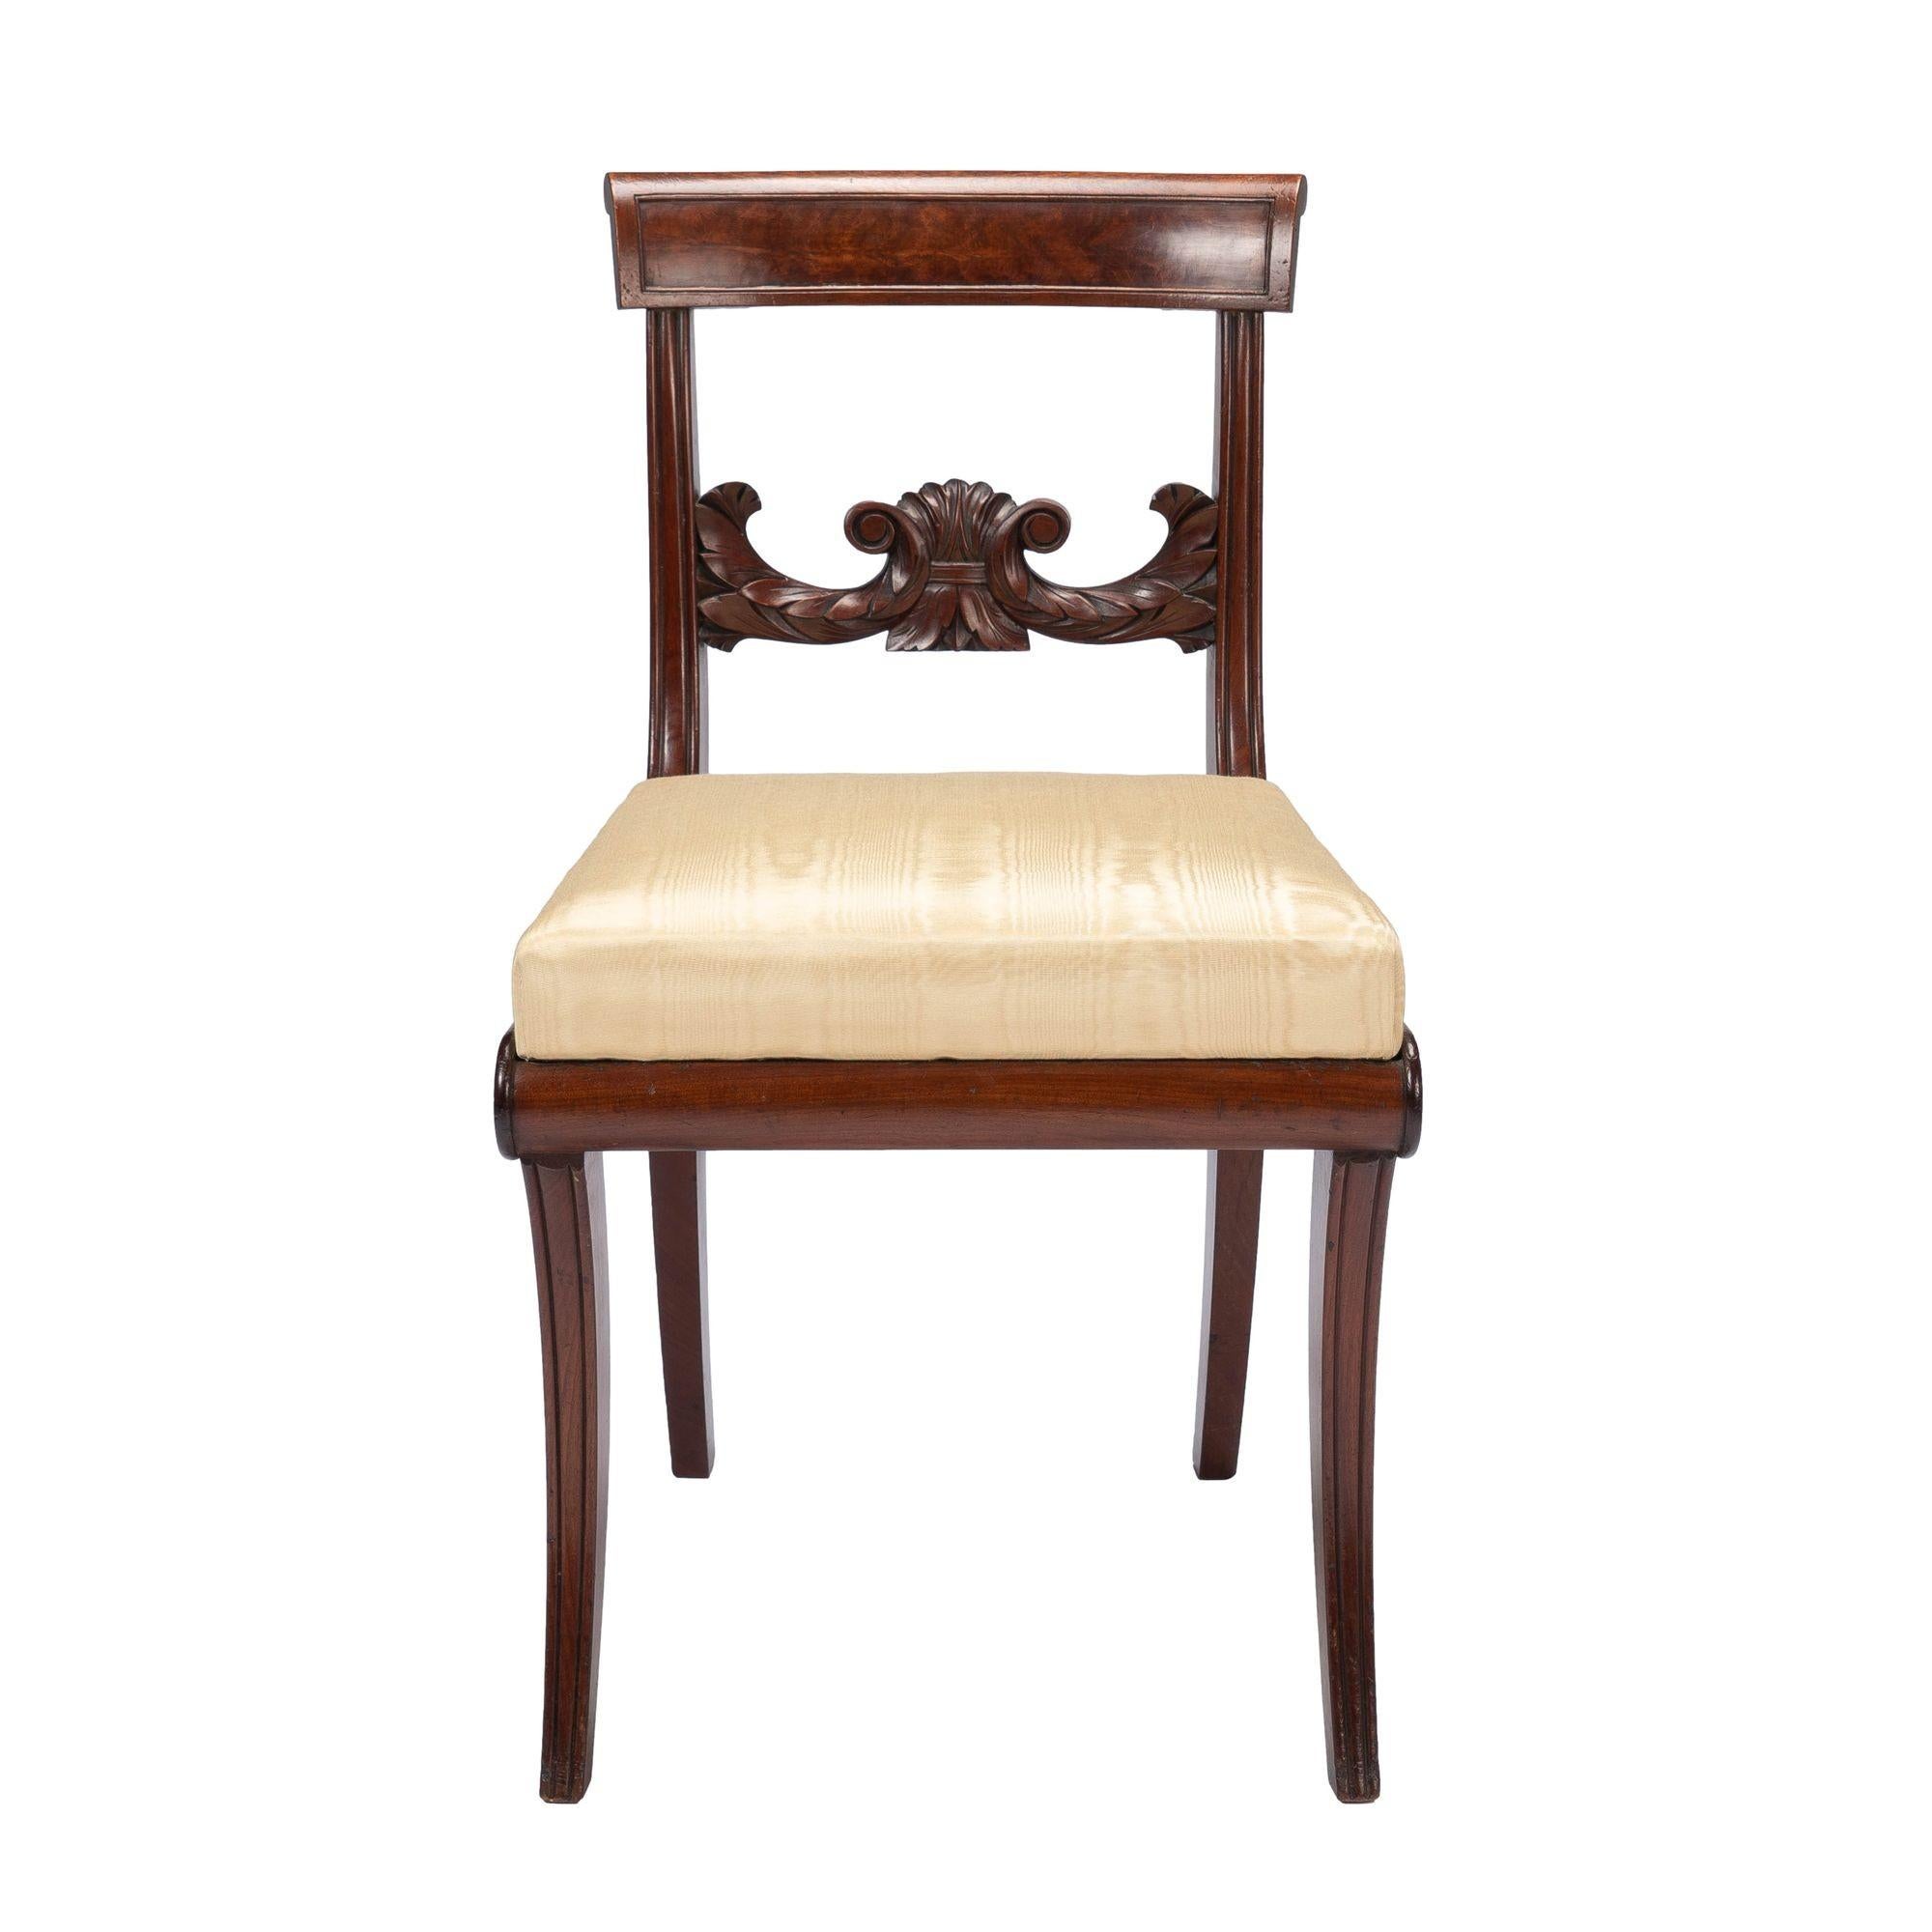 New York Neoclassic klismos form side chair in Honduran mahogany with upholstered box seat. The chair stands on four sabre legs morticed to a mahogany seat frame and fitted with an upholstered box seat. The rear legs continue upward to form the back